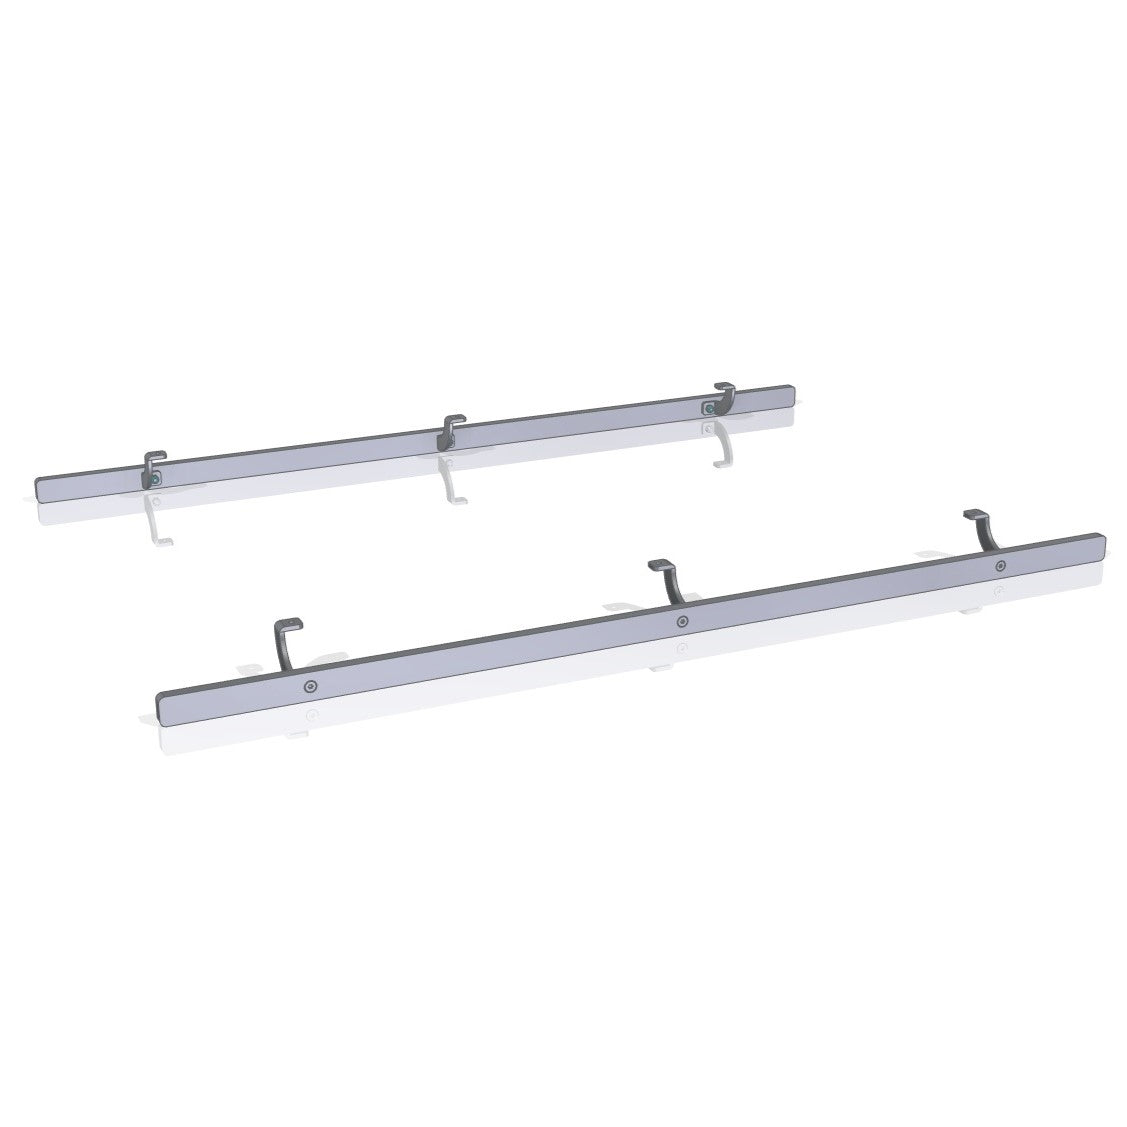 Double-sided equipment rail for treatment table 120x60cm